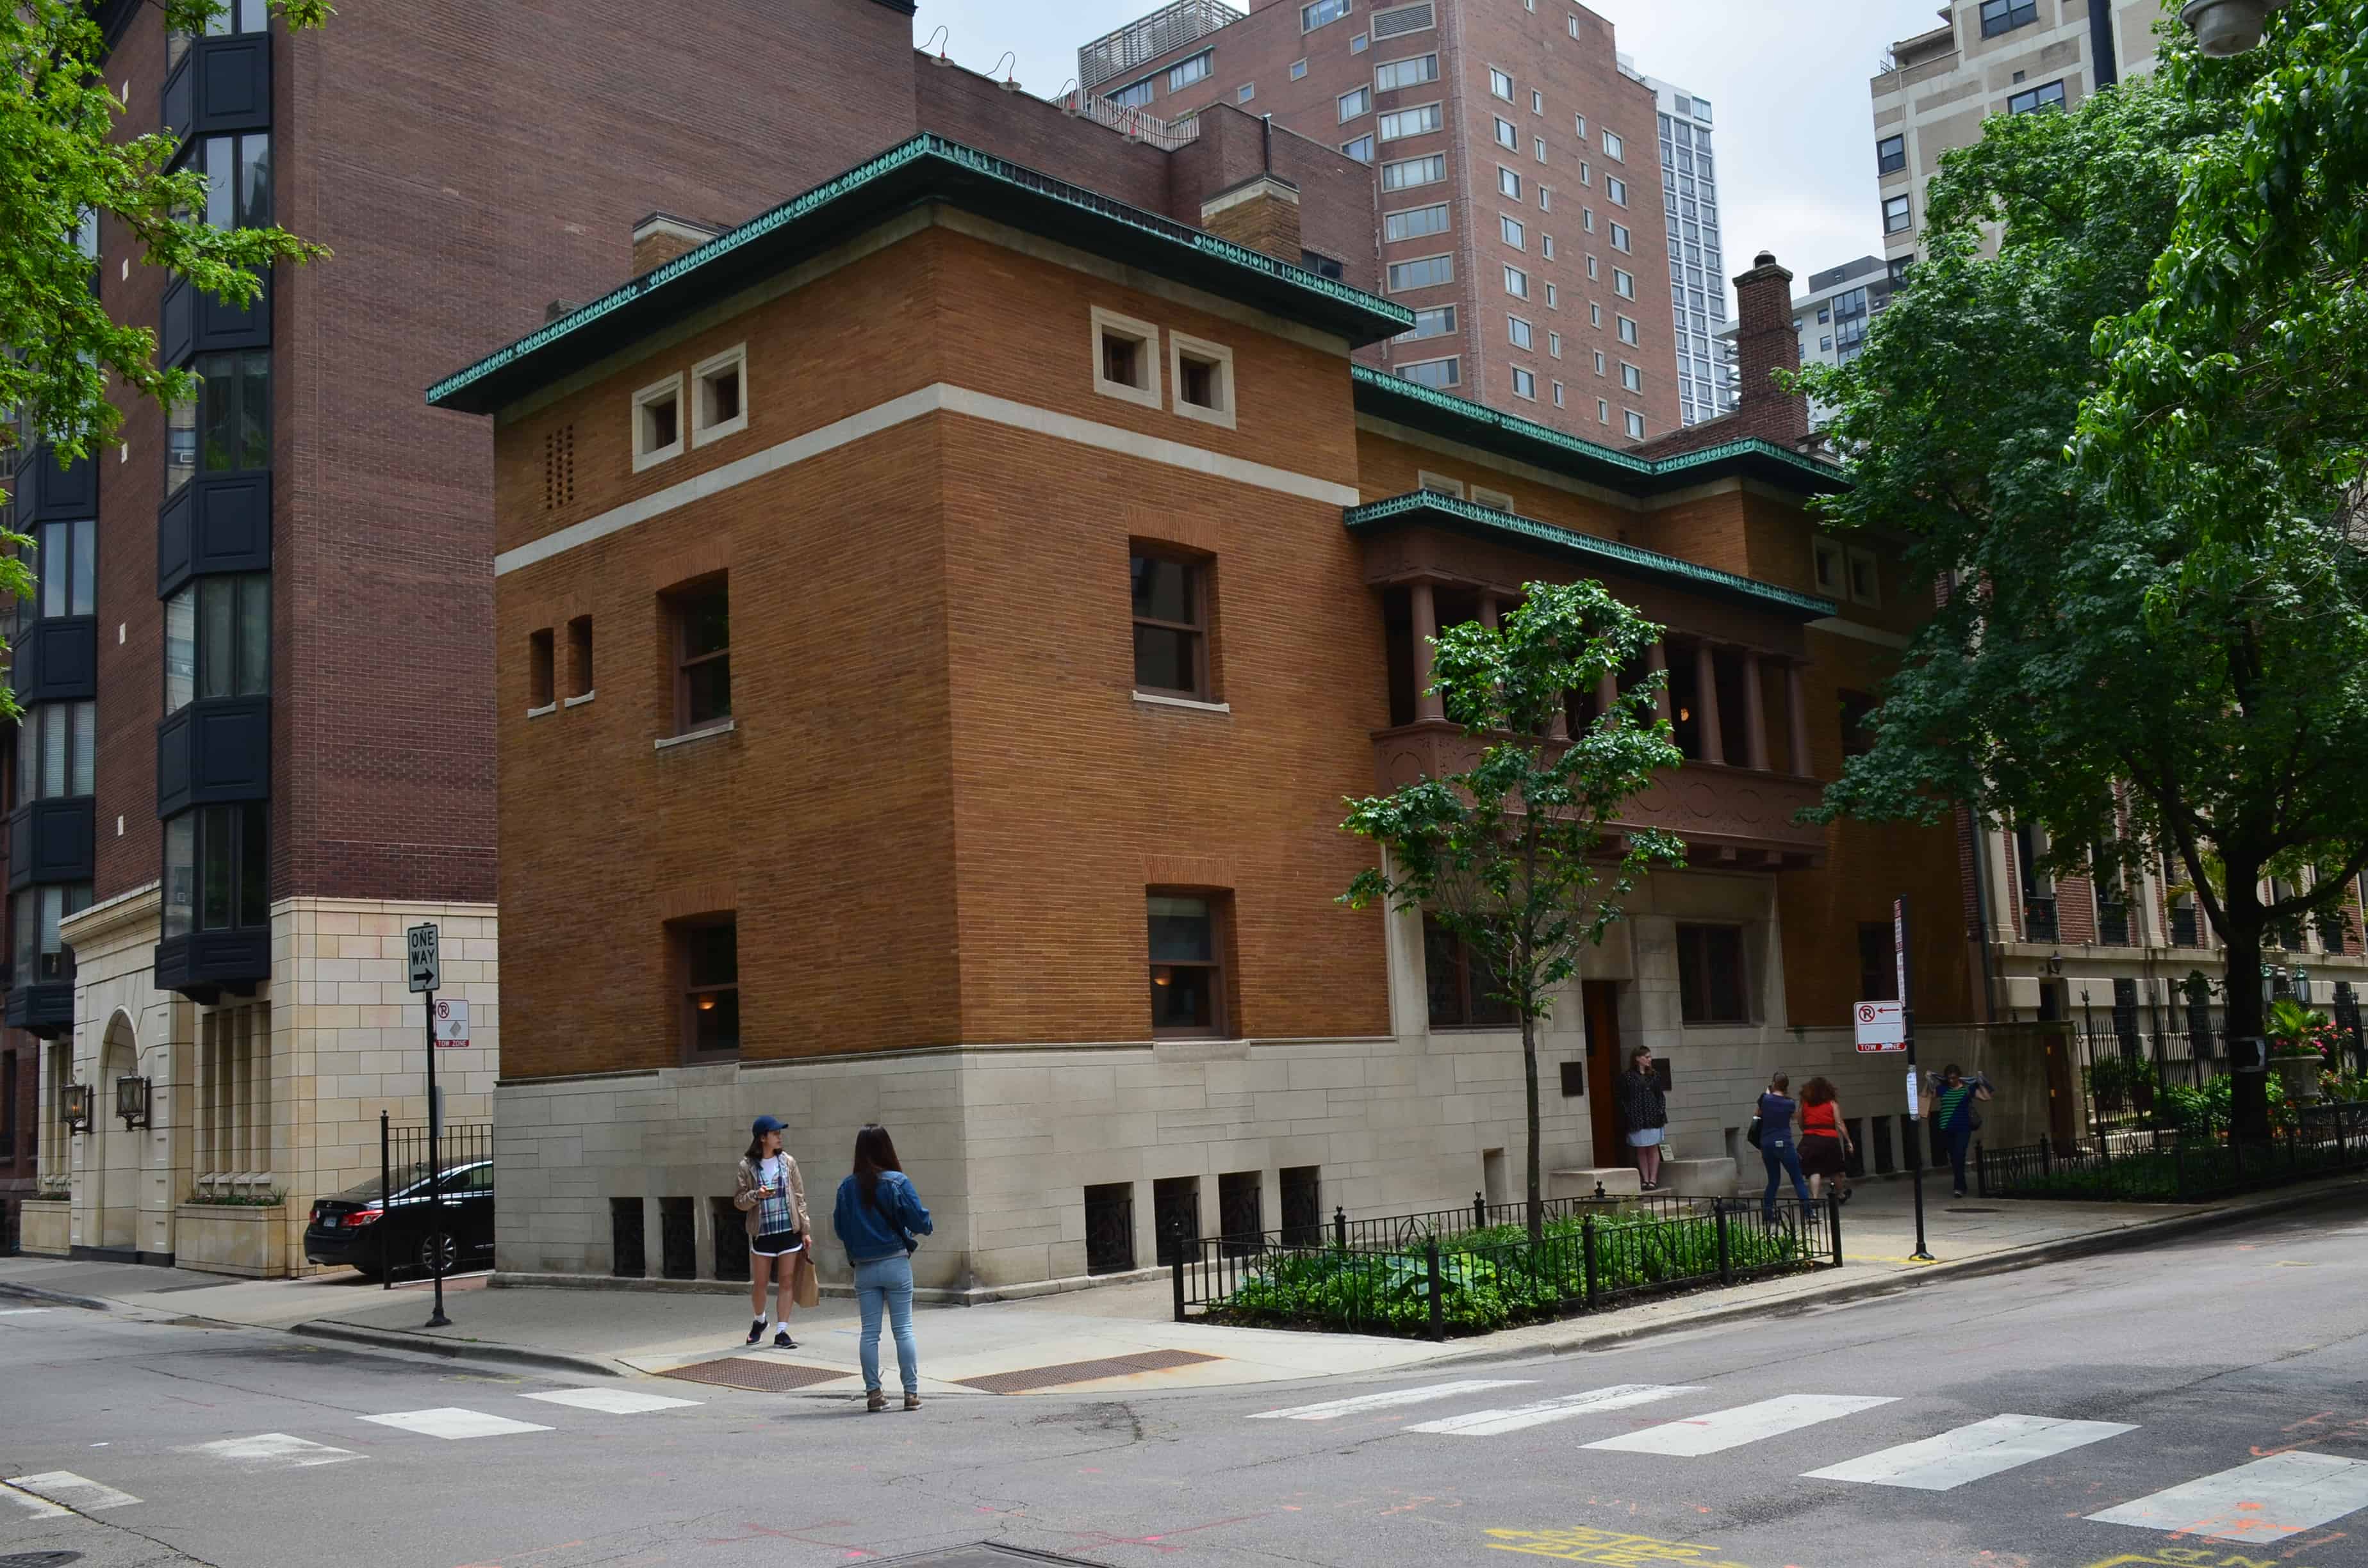 Charnley-Persky House in Chicago, Illinois